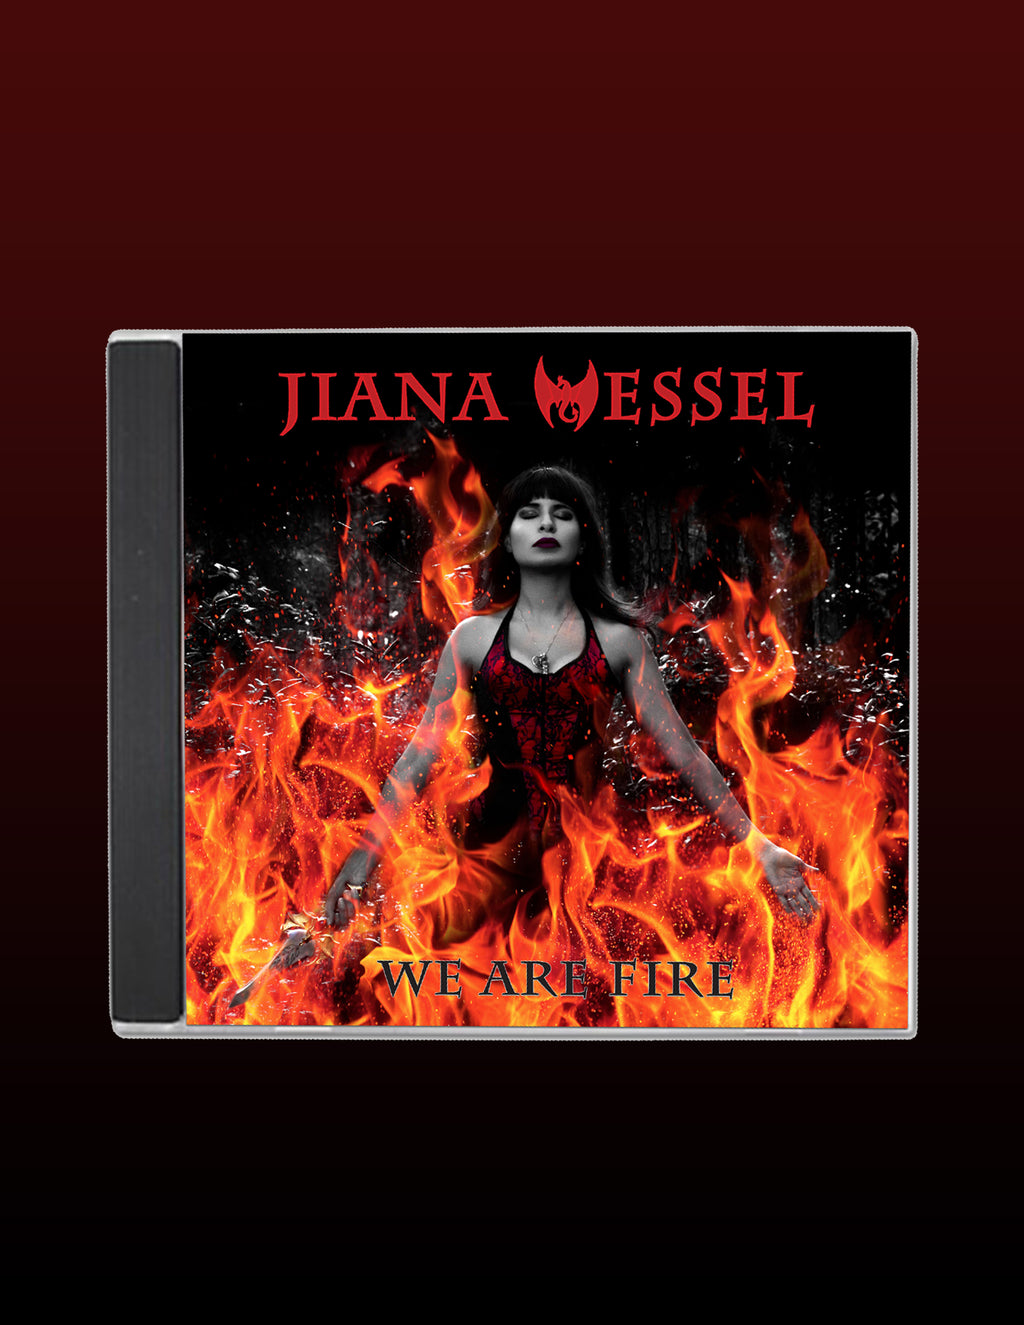 The fire is yours to have and hold with this physical CD of We Are Fire! by Jiana Wessel. Experience Dragons, Darkness and Fire with this musical compilation!